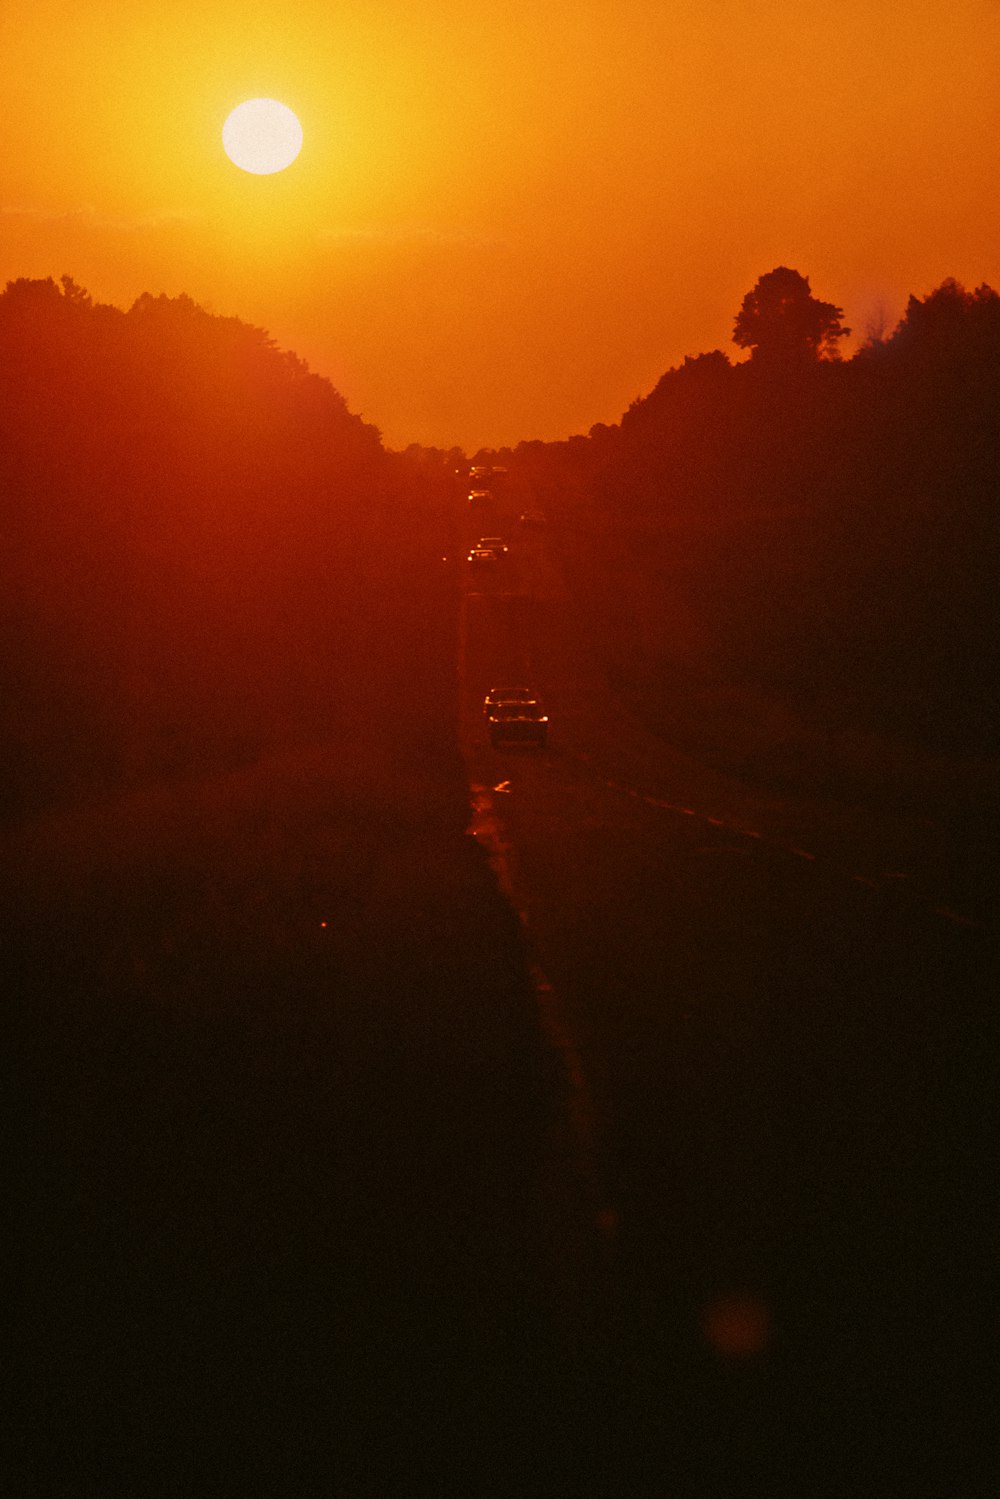 the sun is setting over a road with cars on it